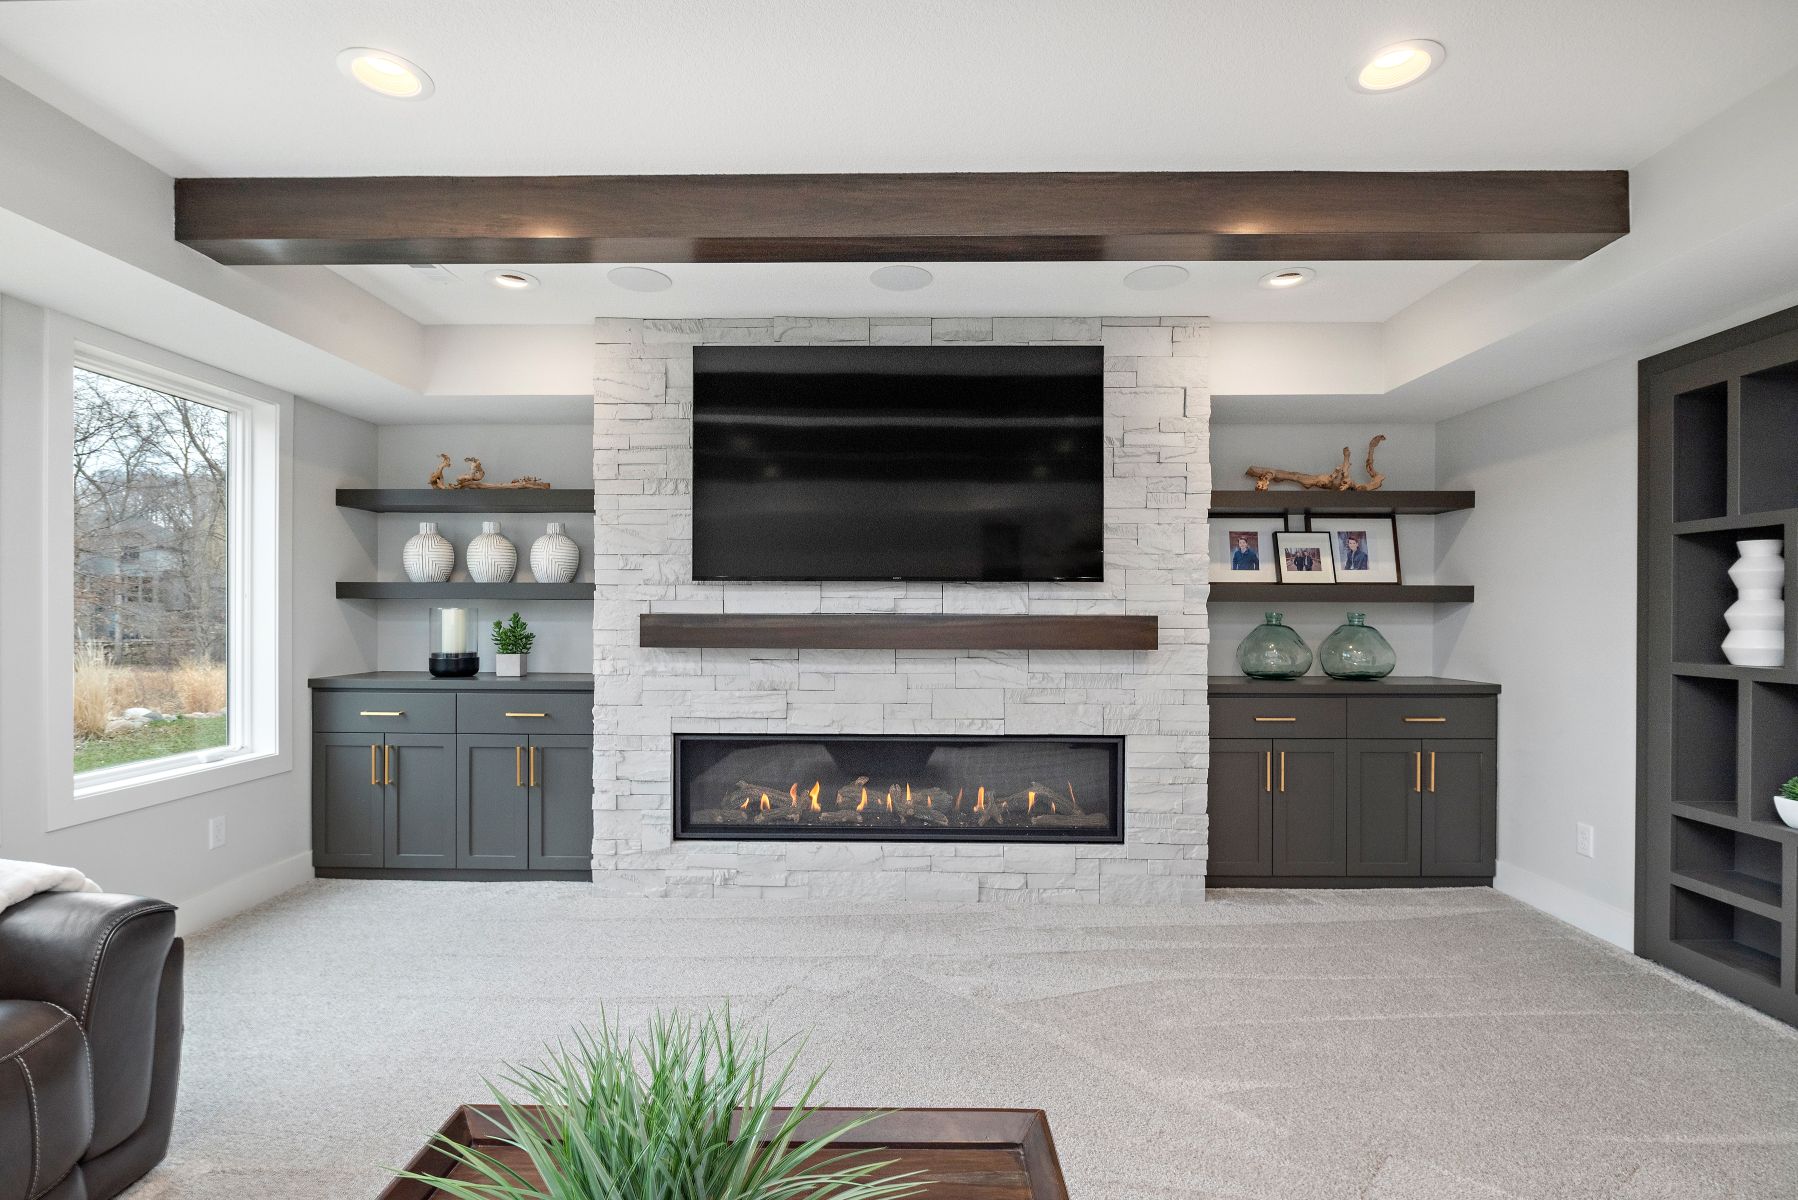 Transitional Basement Finish | Living Room, Fireplace, Ceiling Beams | FBC Remodel